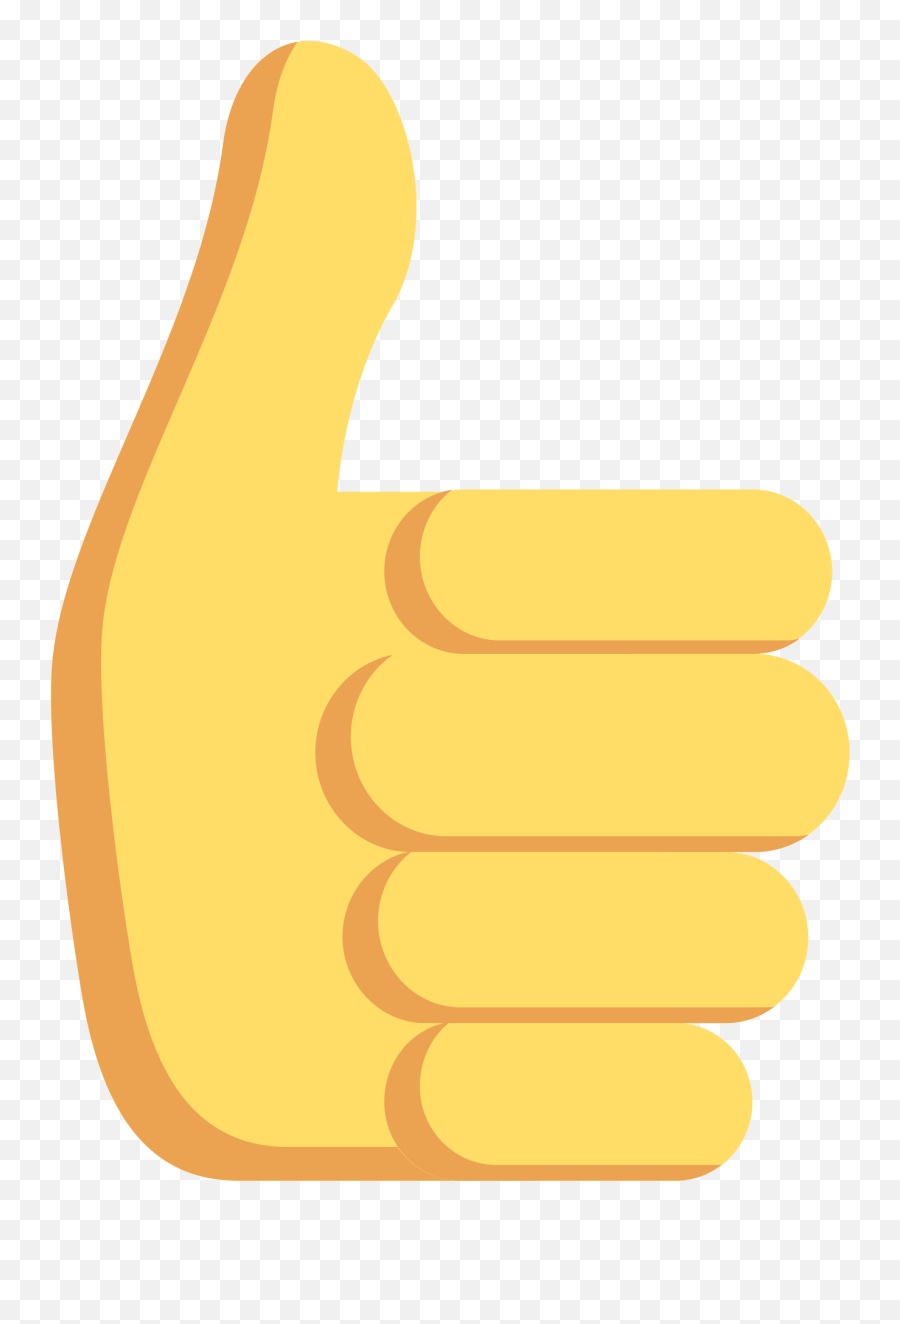 Thumbs Up Emoji Png Transparent Picture - Thumbs Up Emoji Flat,Black Thumbs Up Emoji